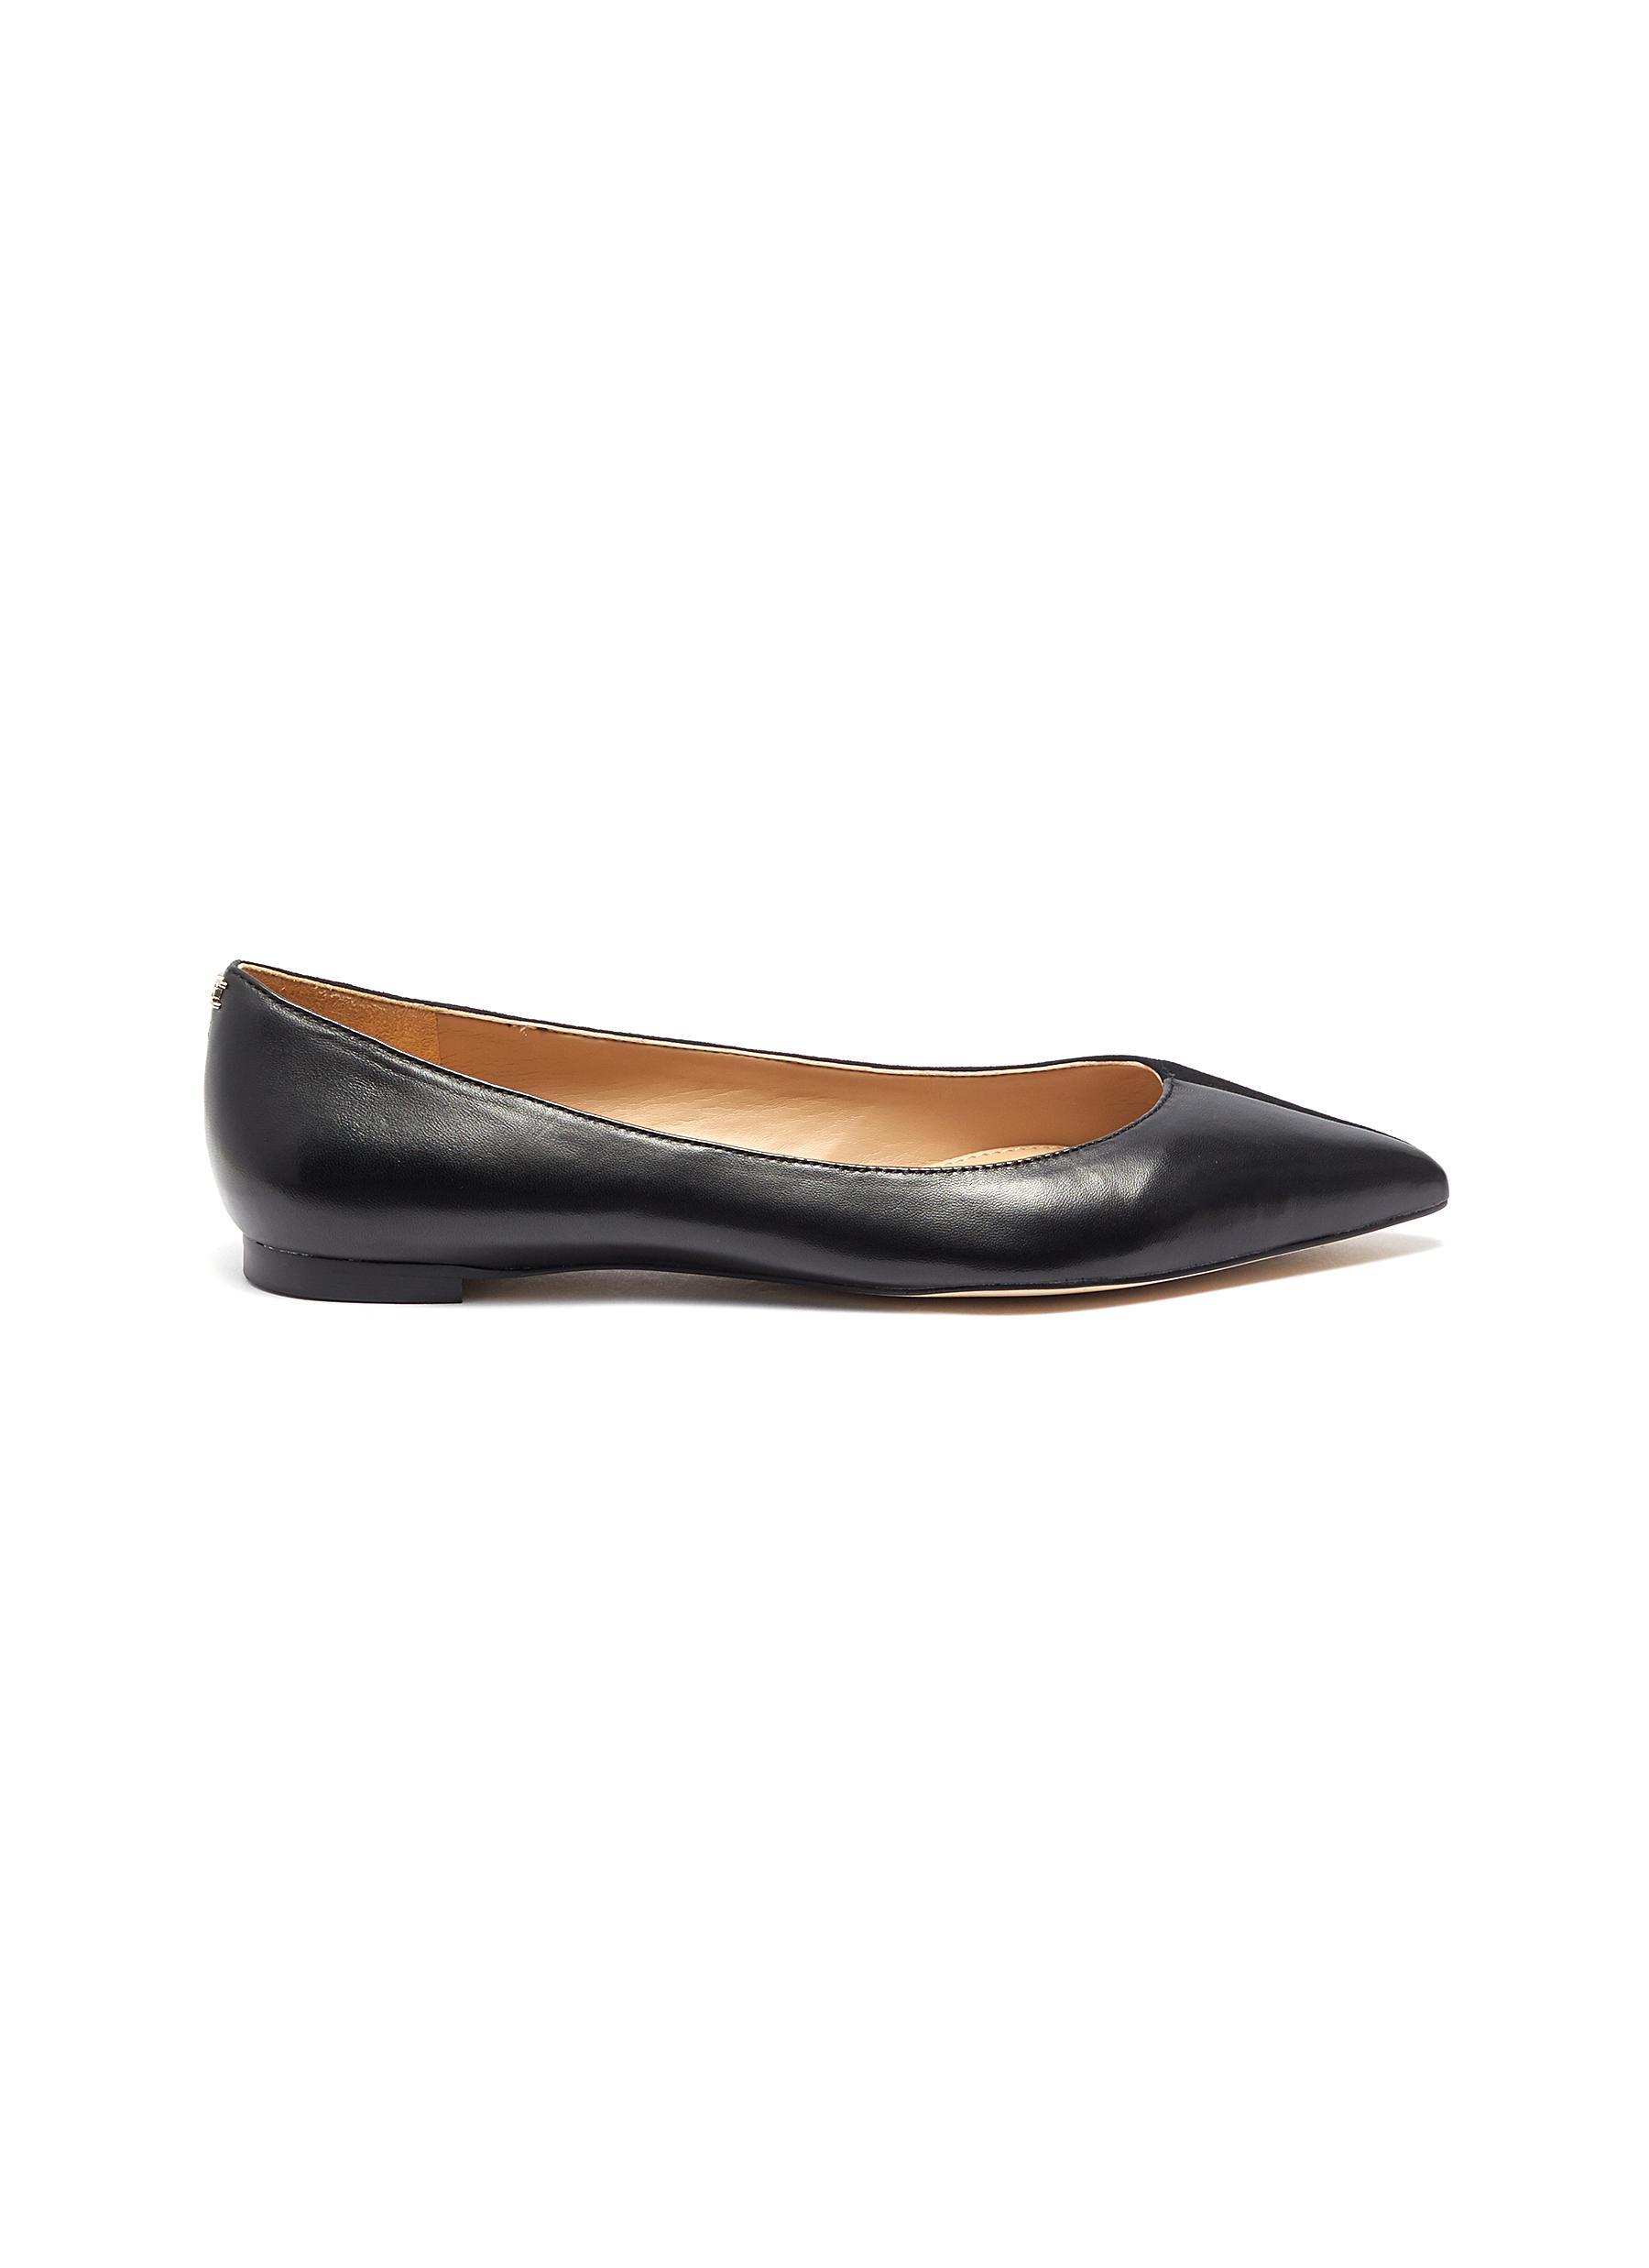 Sally suede panel leather skimmer flats by Sam Edelman